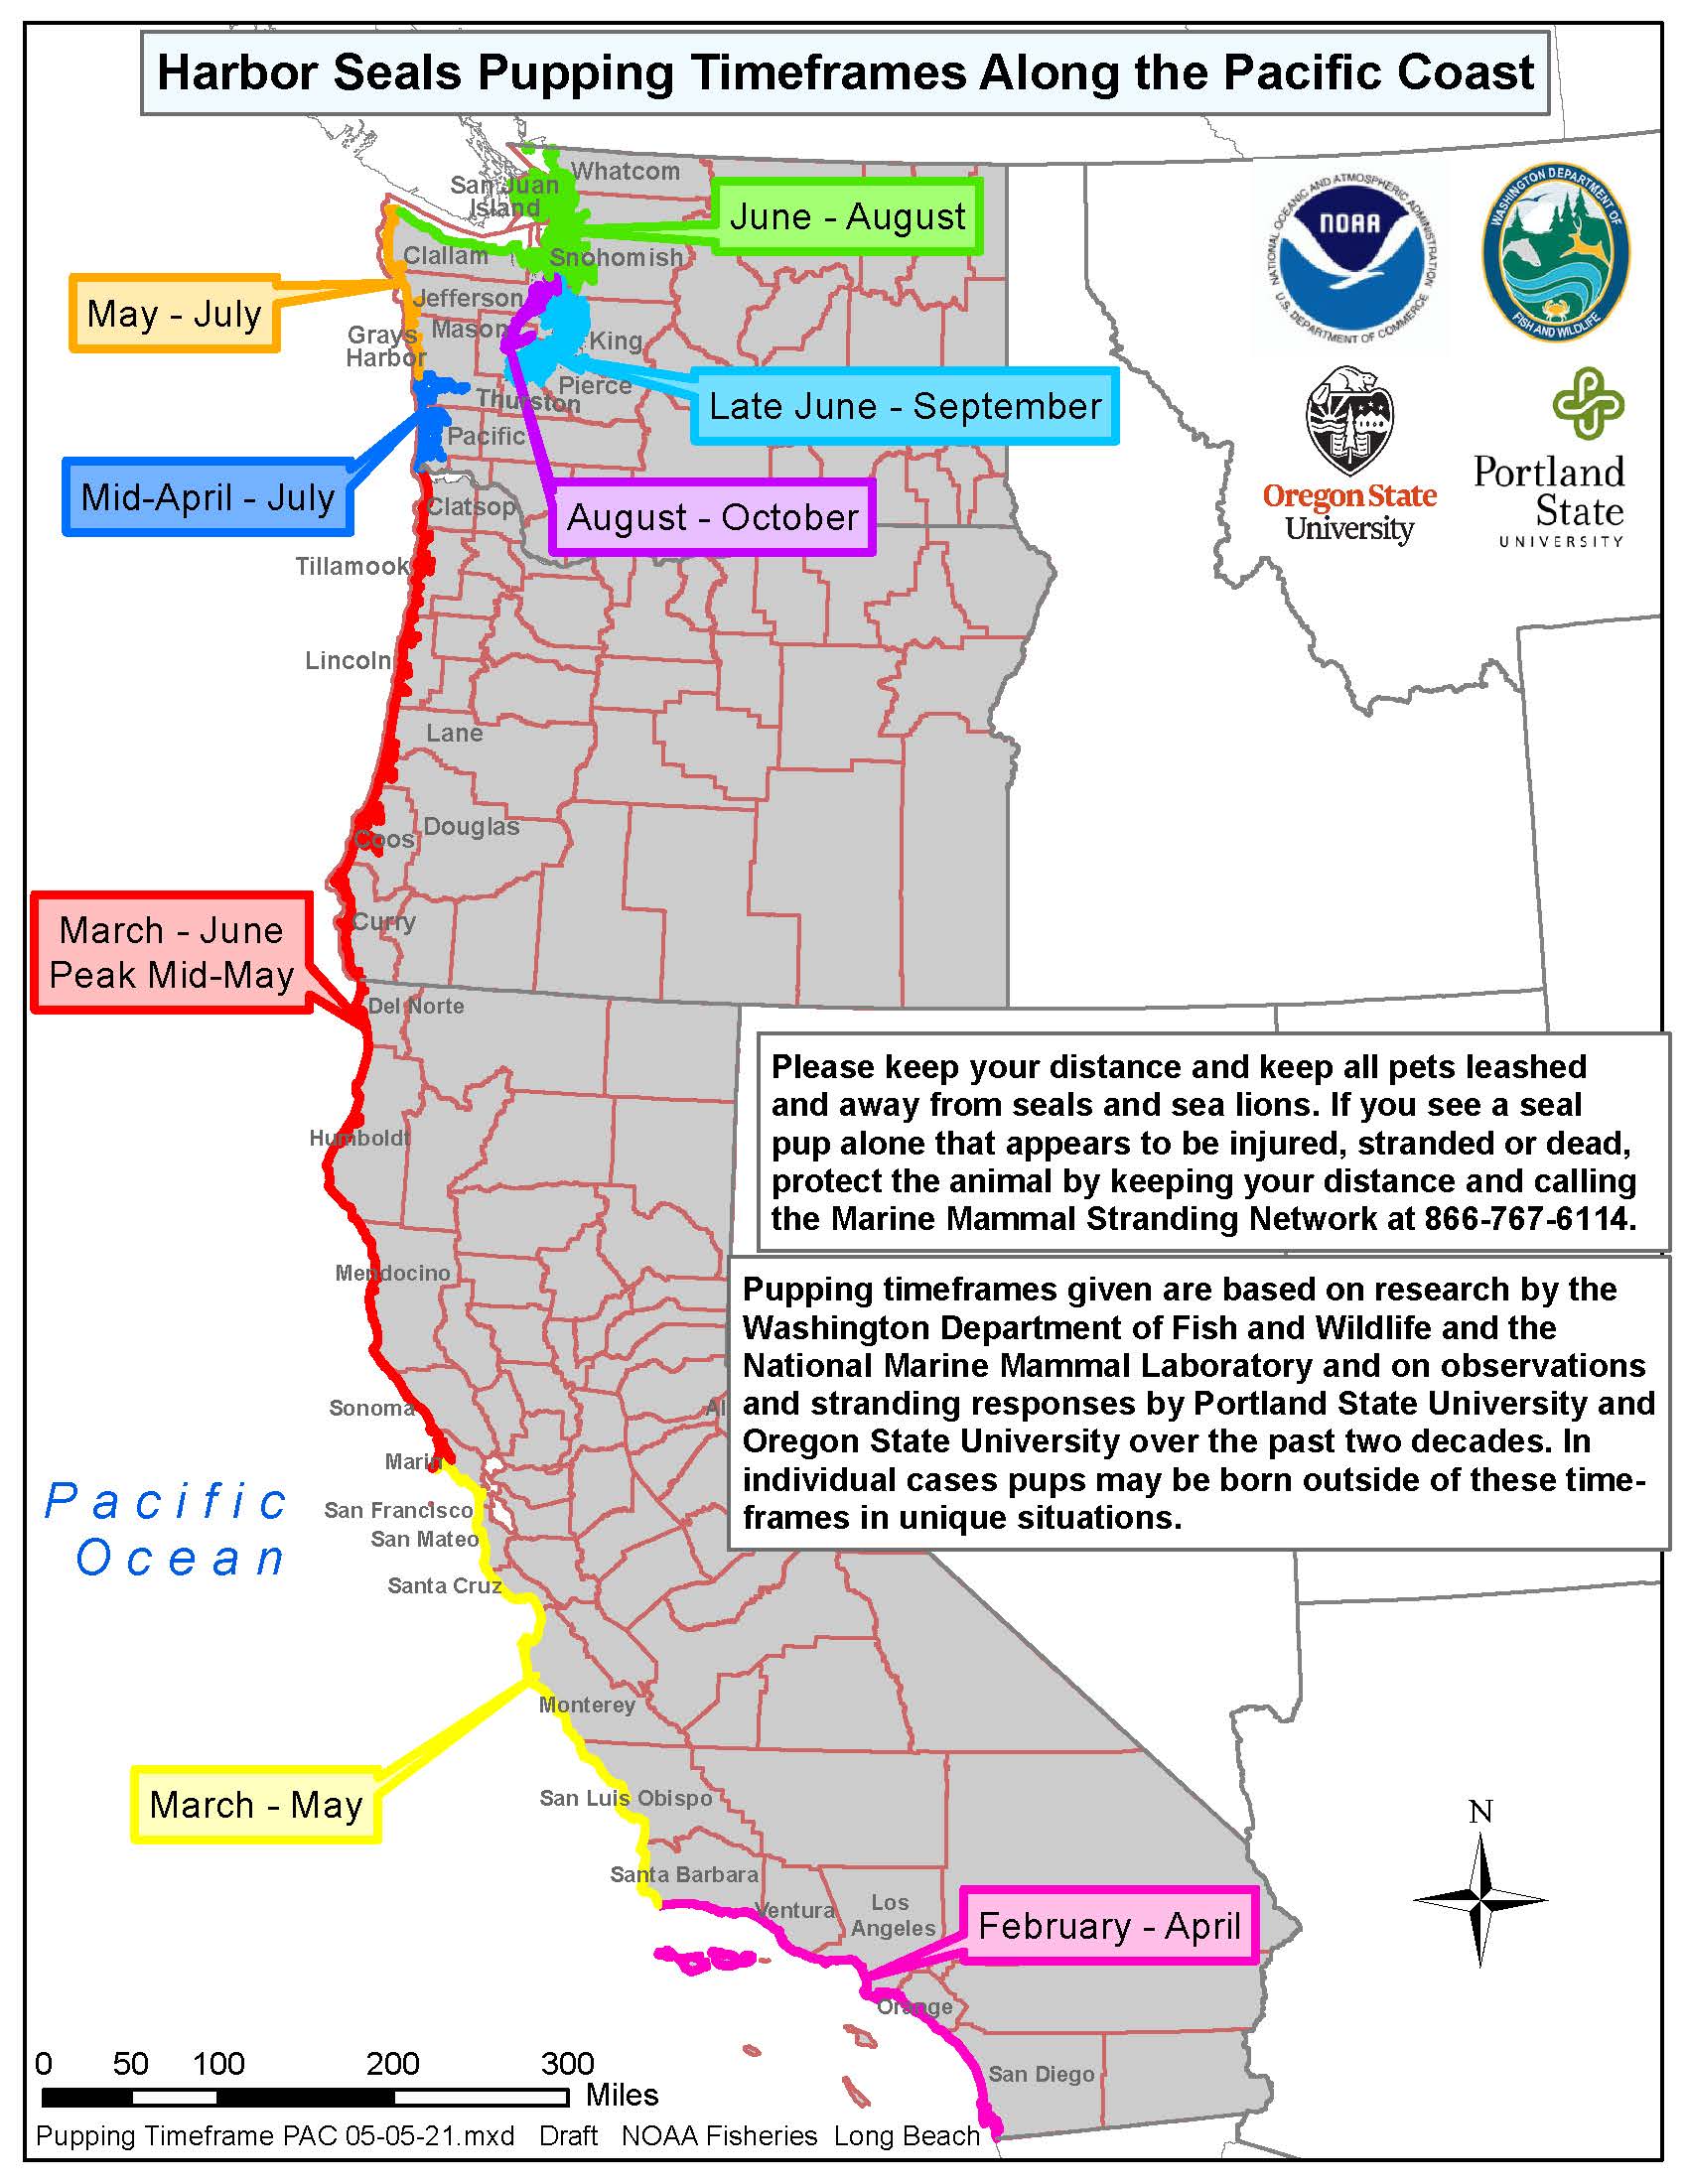 Map of the West Coast showing areas of Harbor Seal pupping